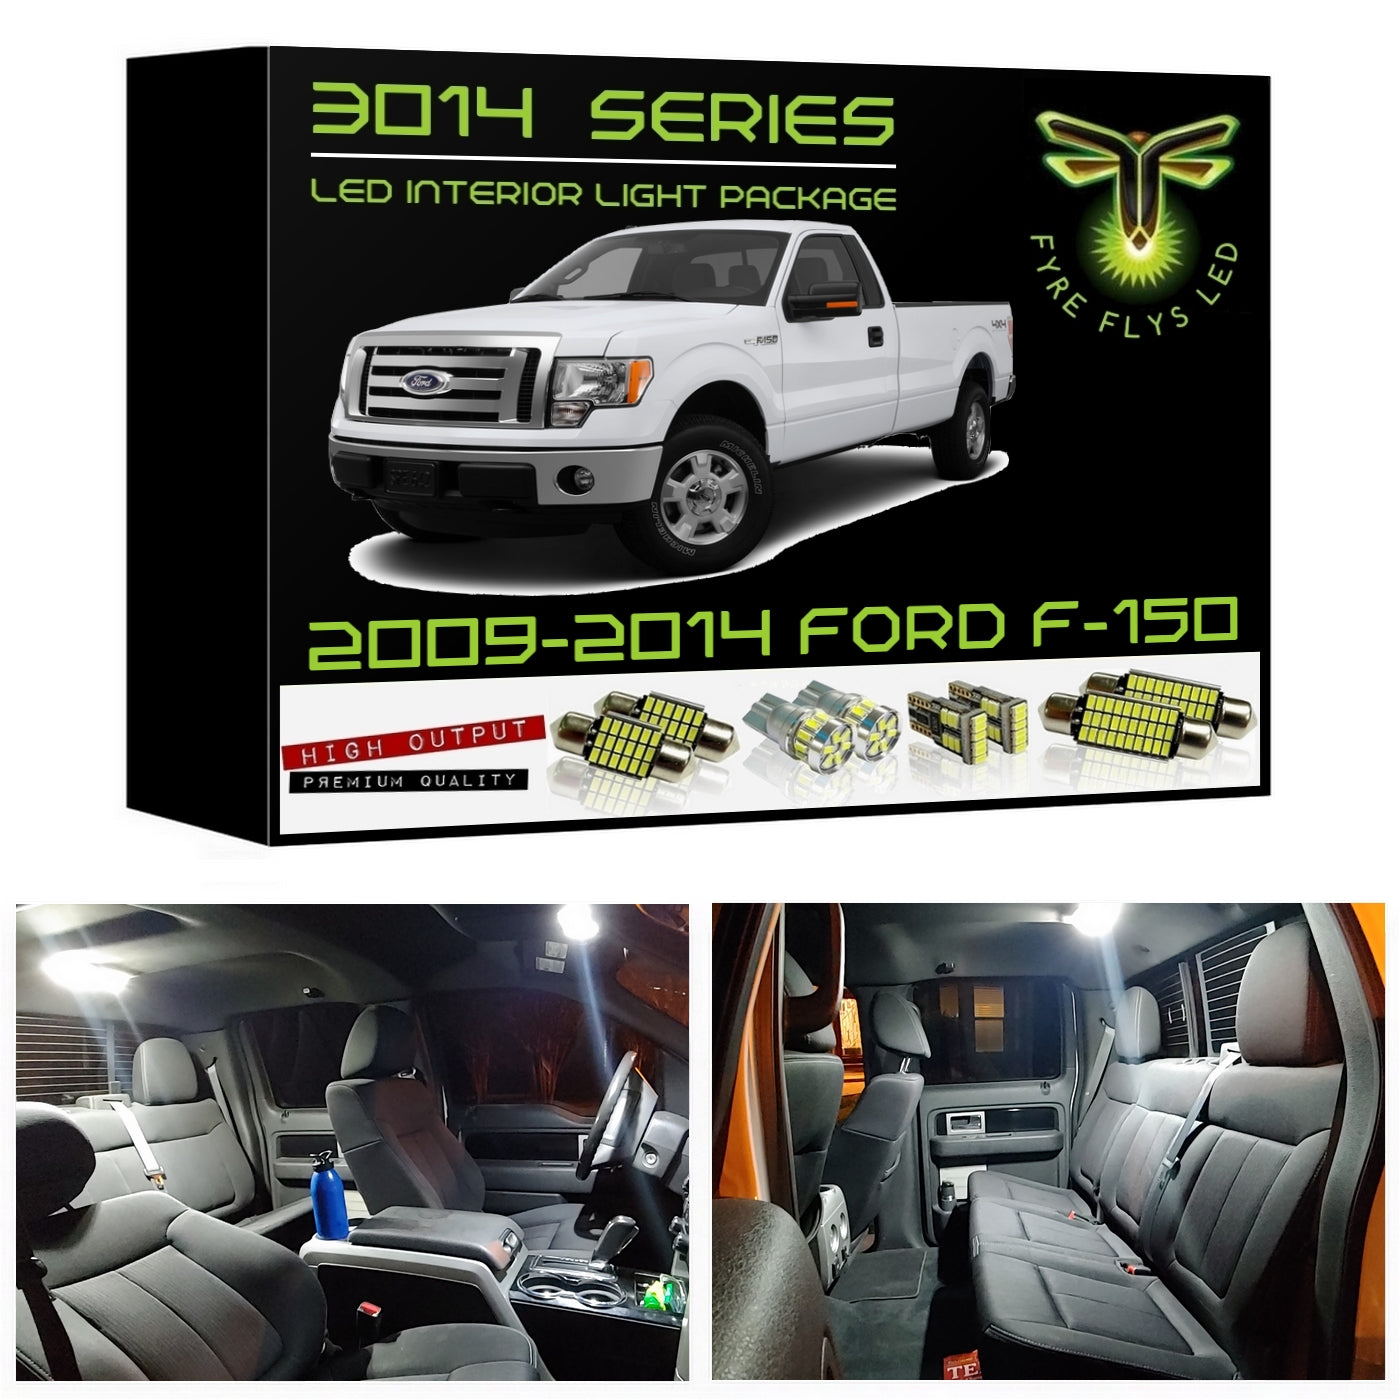 17x White LED Lights Interior Package for 2003-2014 Ford